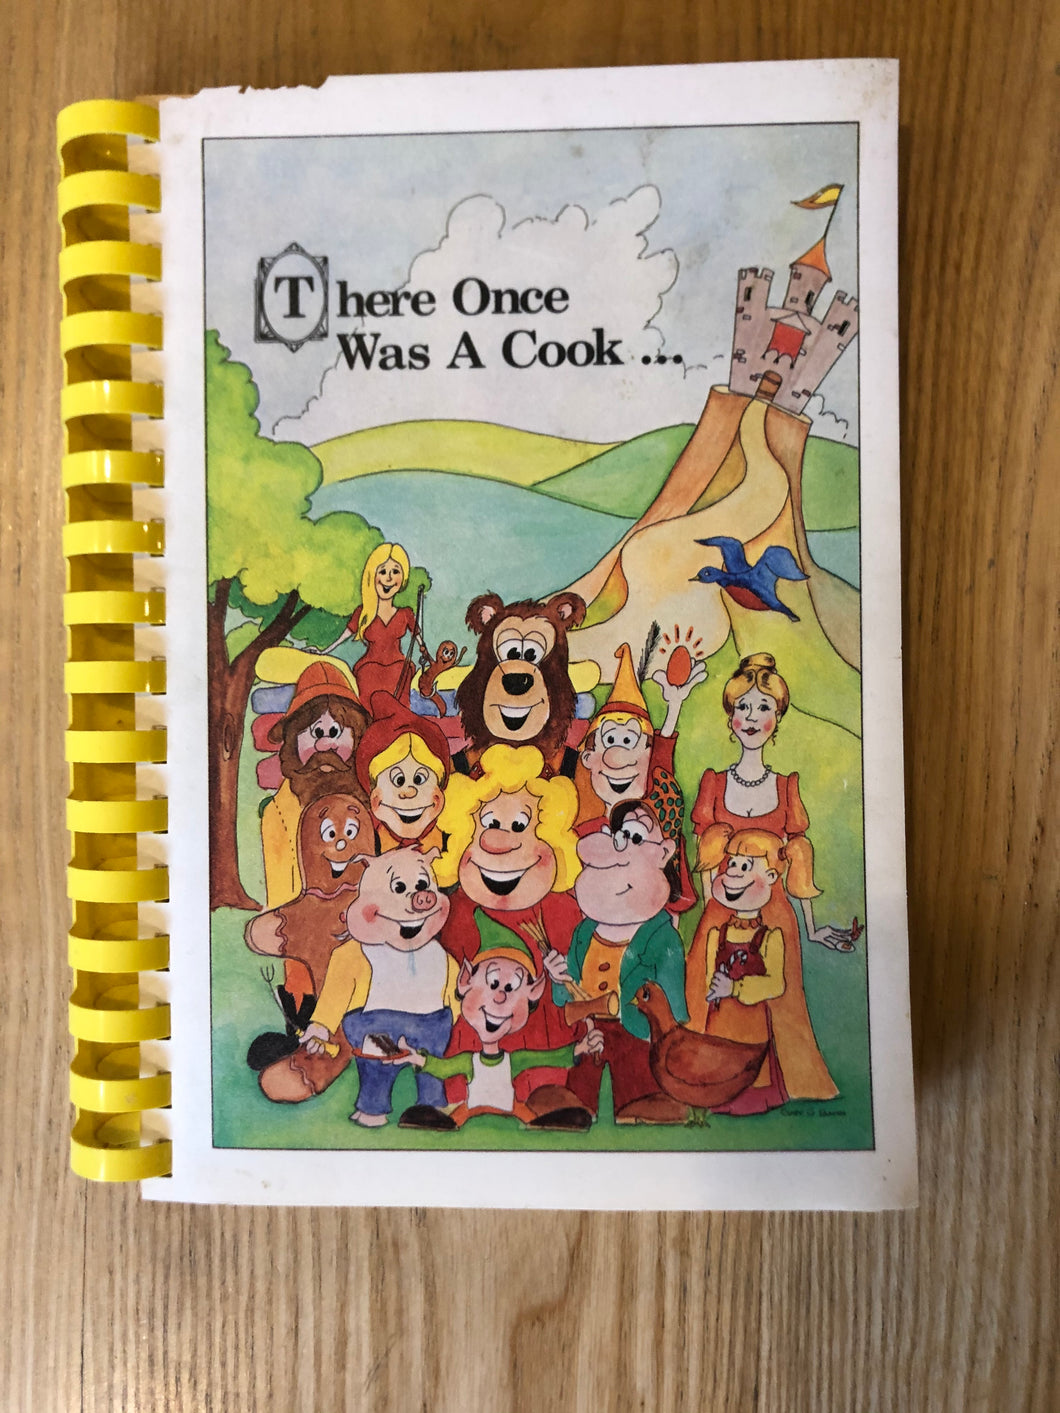 There Once Was A Cook...